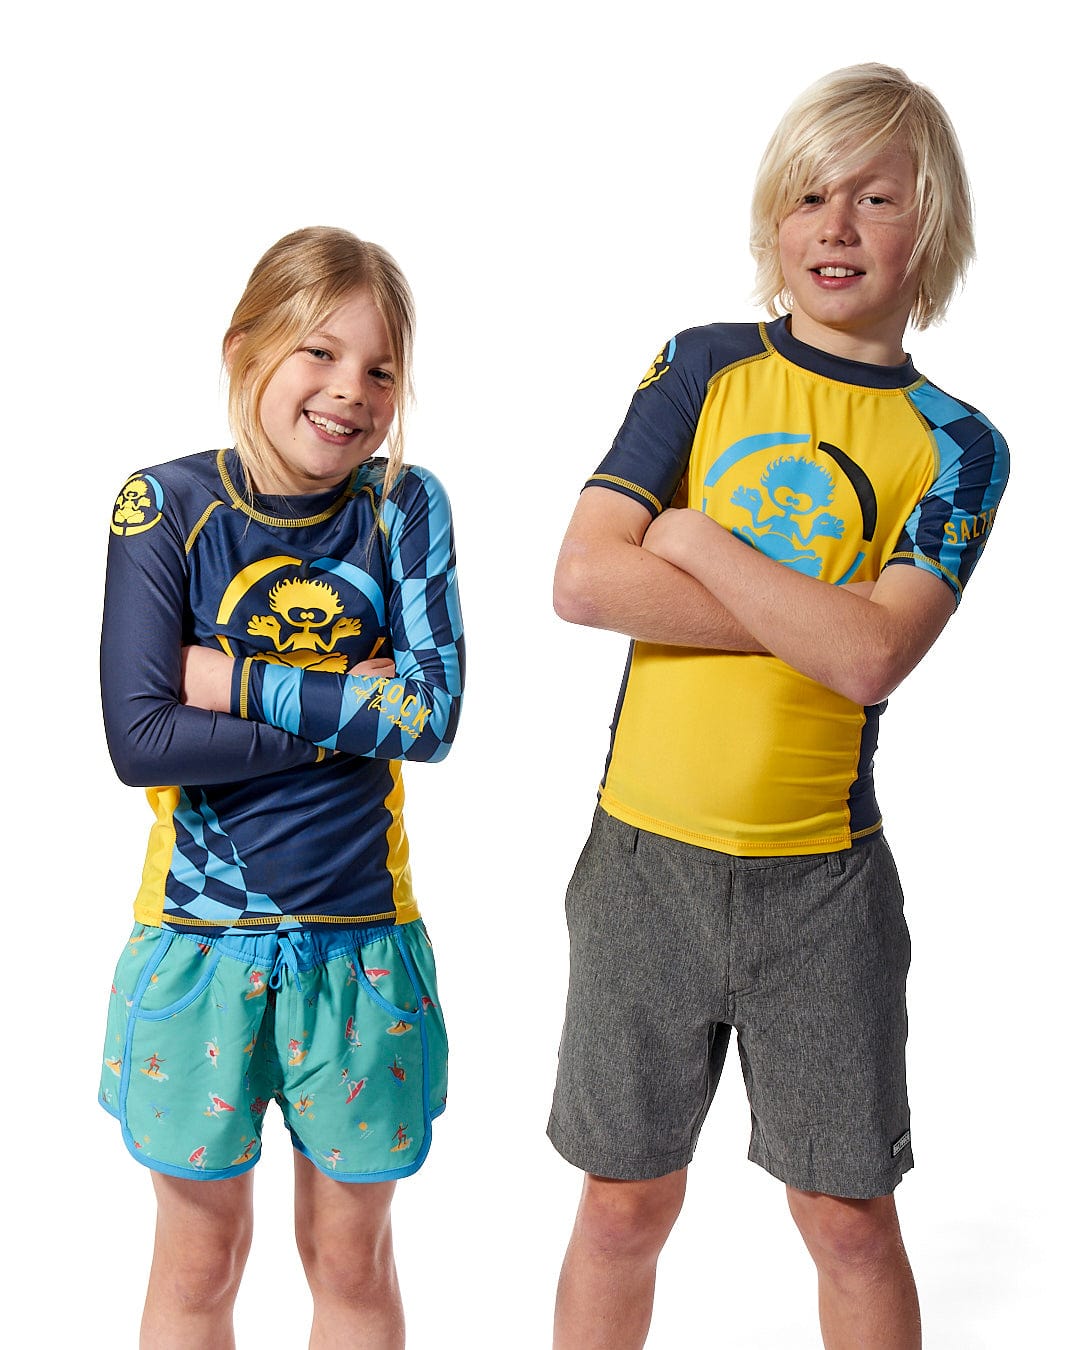 Two children posing for a photo in a Saltrock Warp - Kids Short Sleeve Rashvest - Yellow, exuding both warmth and comfort.